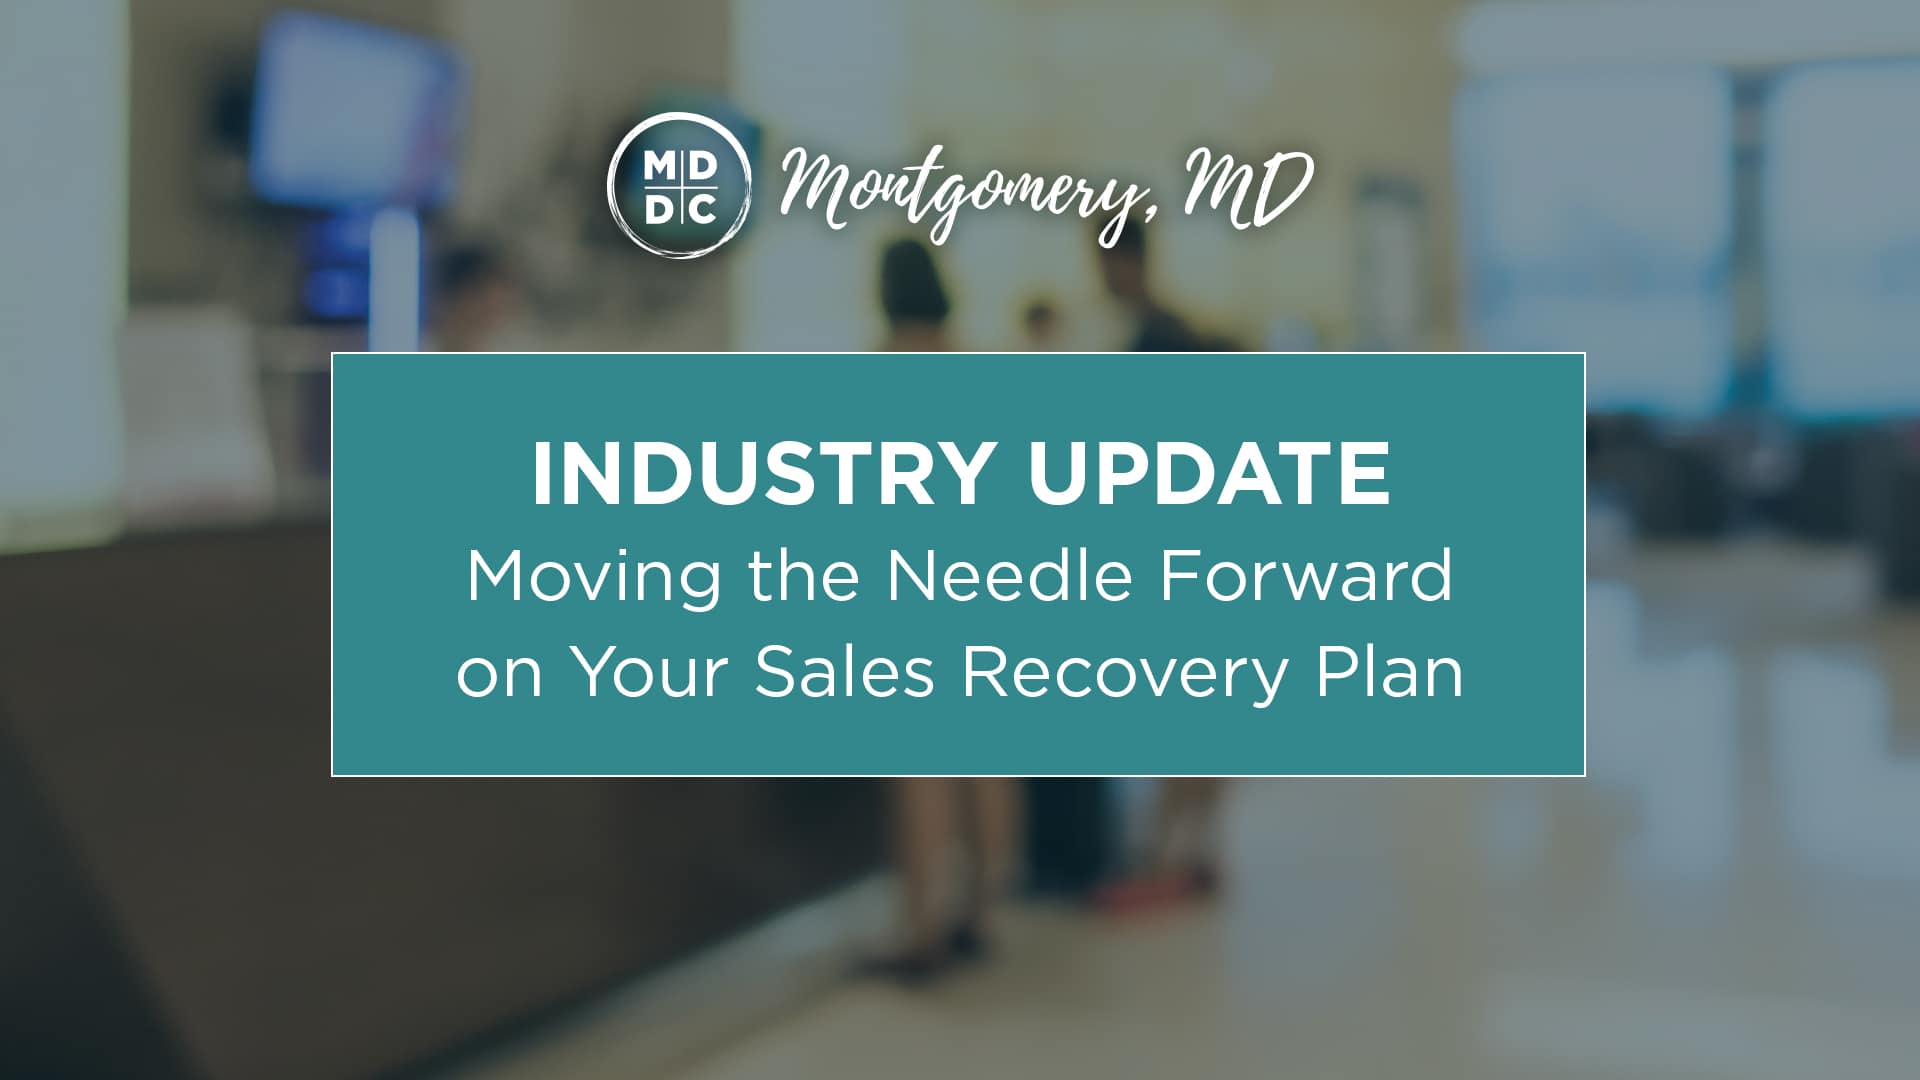 Moving the Needle Forward on Your Sales Recovery Plan